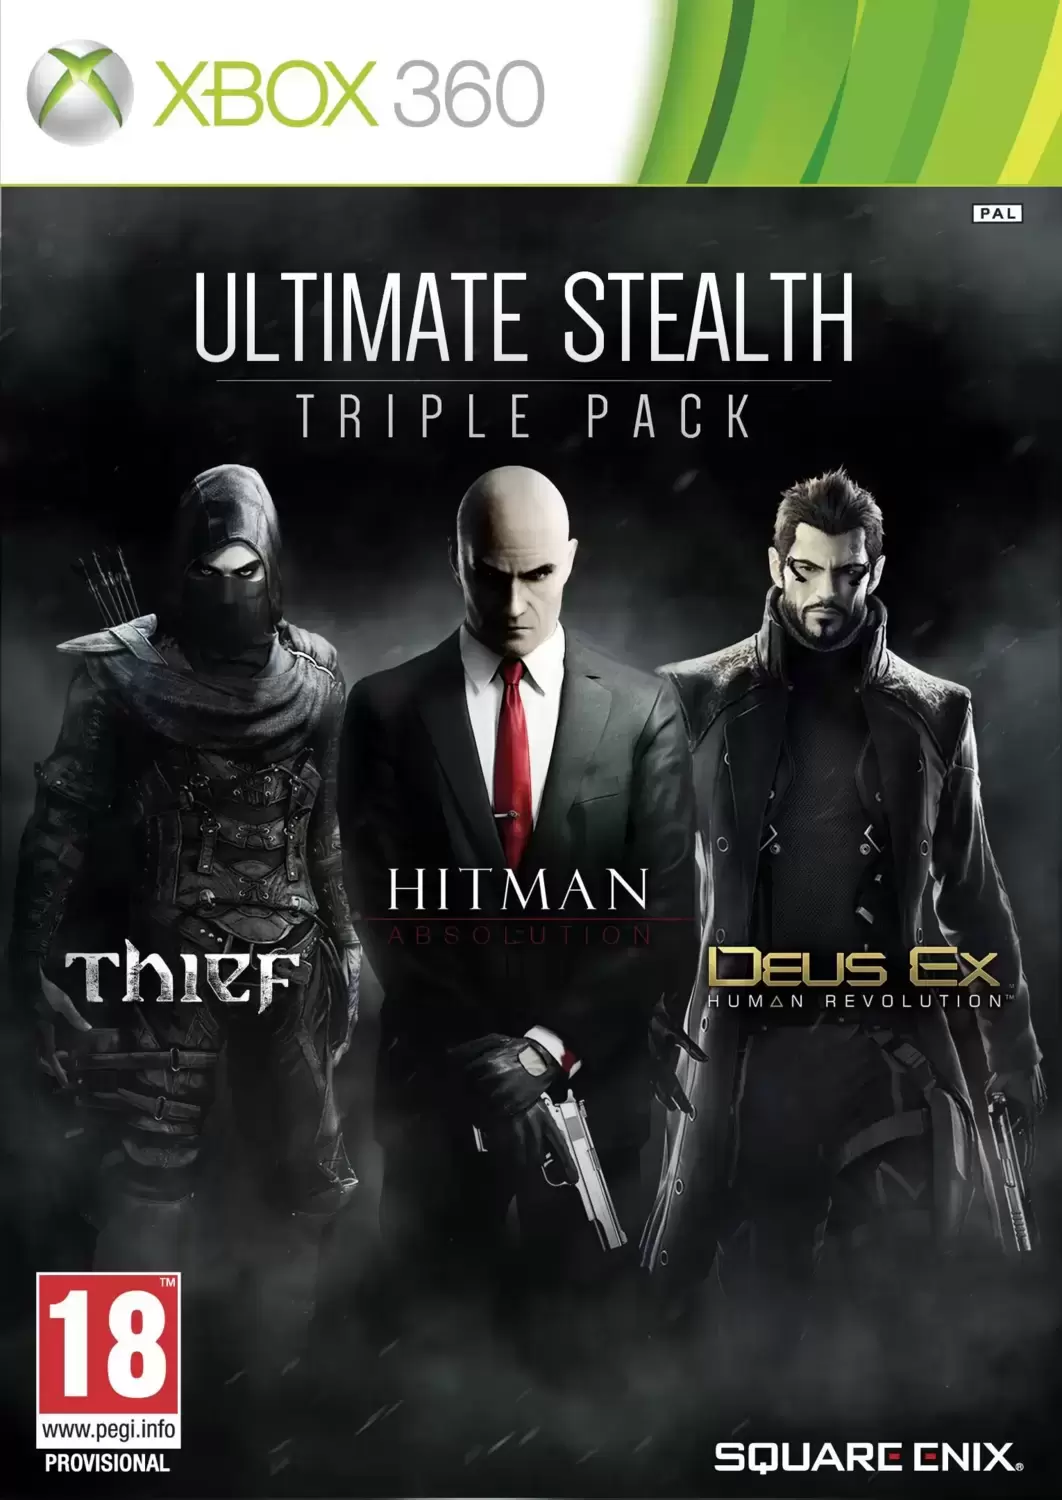 XBOX 360 Games - Ultimate Stealth Triple Pack